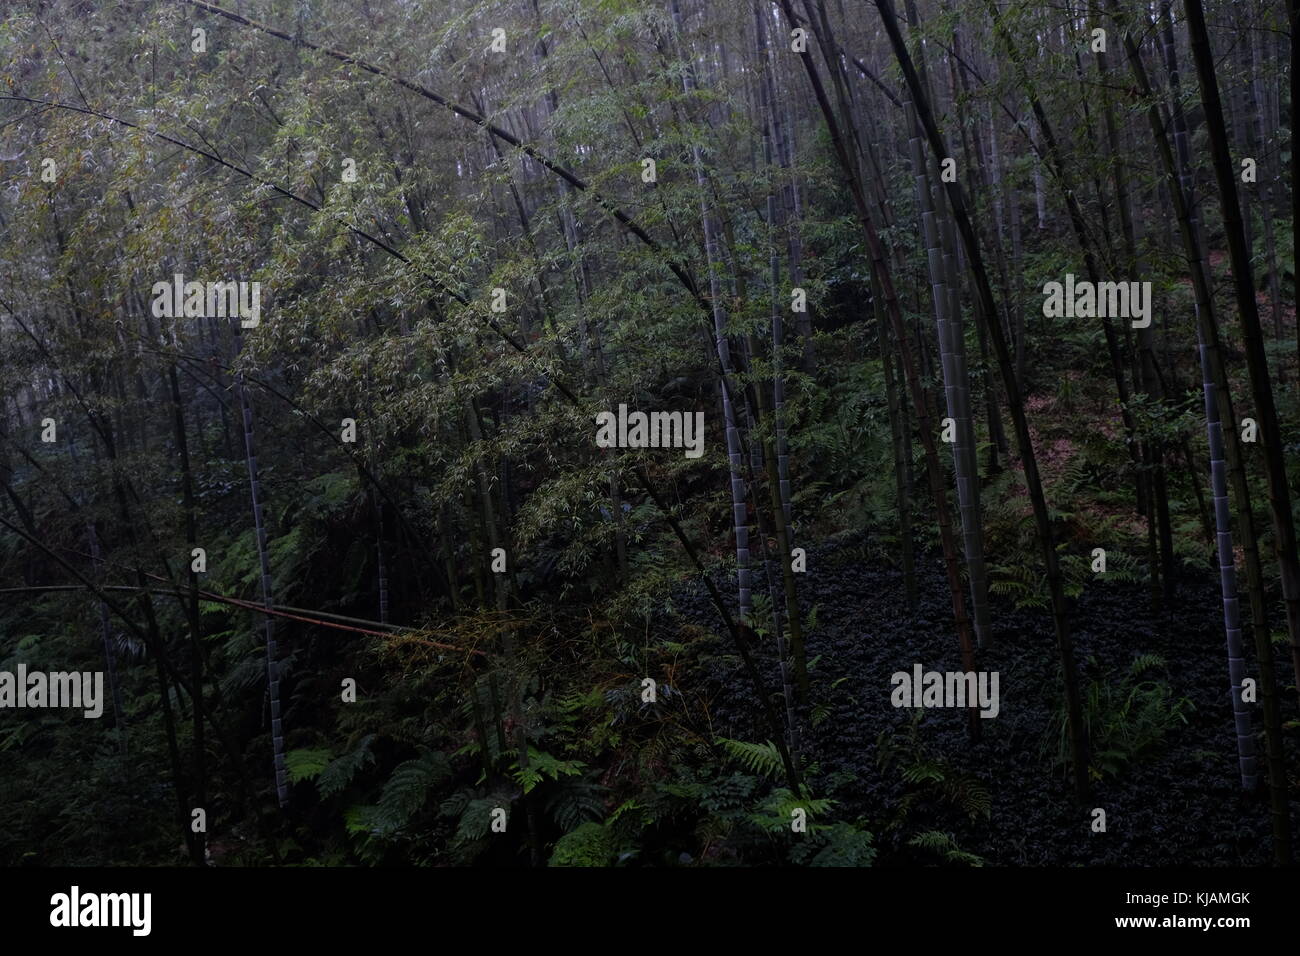 Pre dawn darkness in the bamboo forest at the Shunan Bamboo Forest at Sichuan province at China Stock Photo